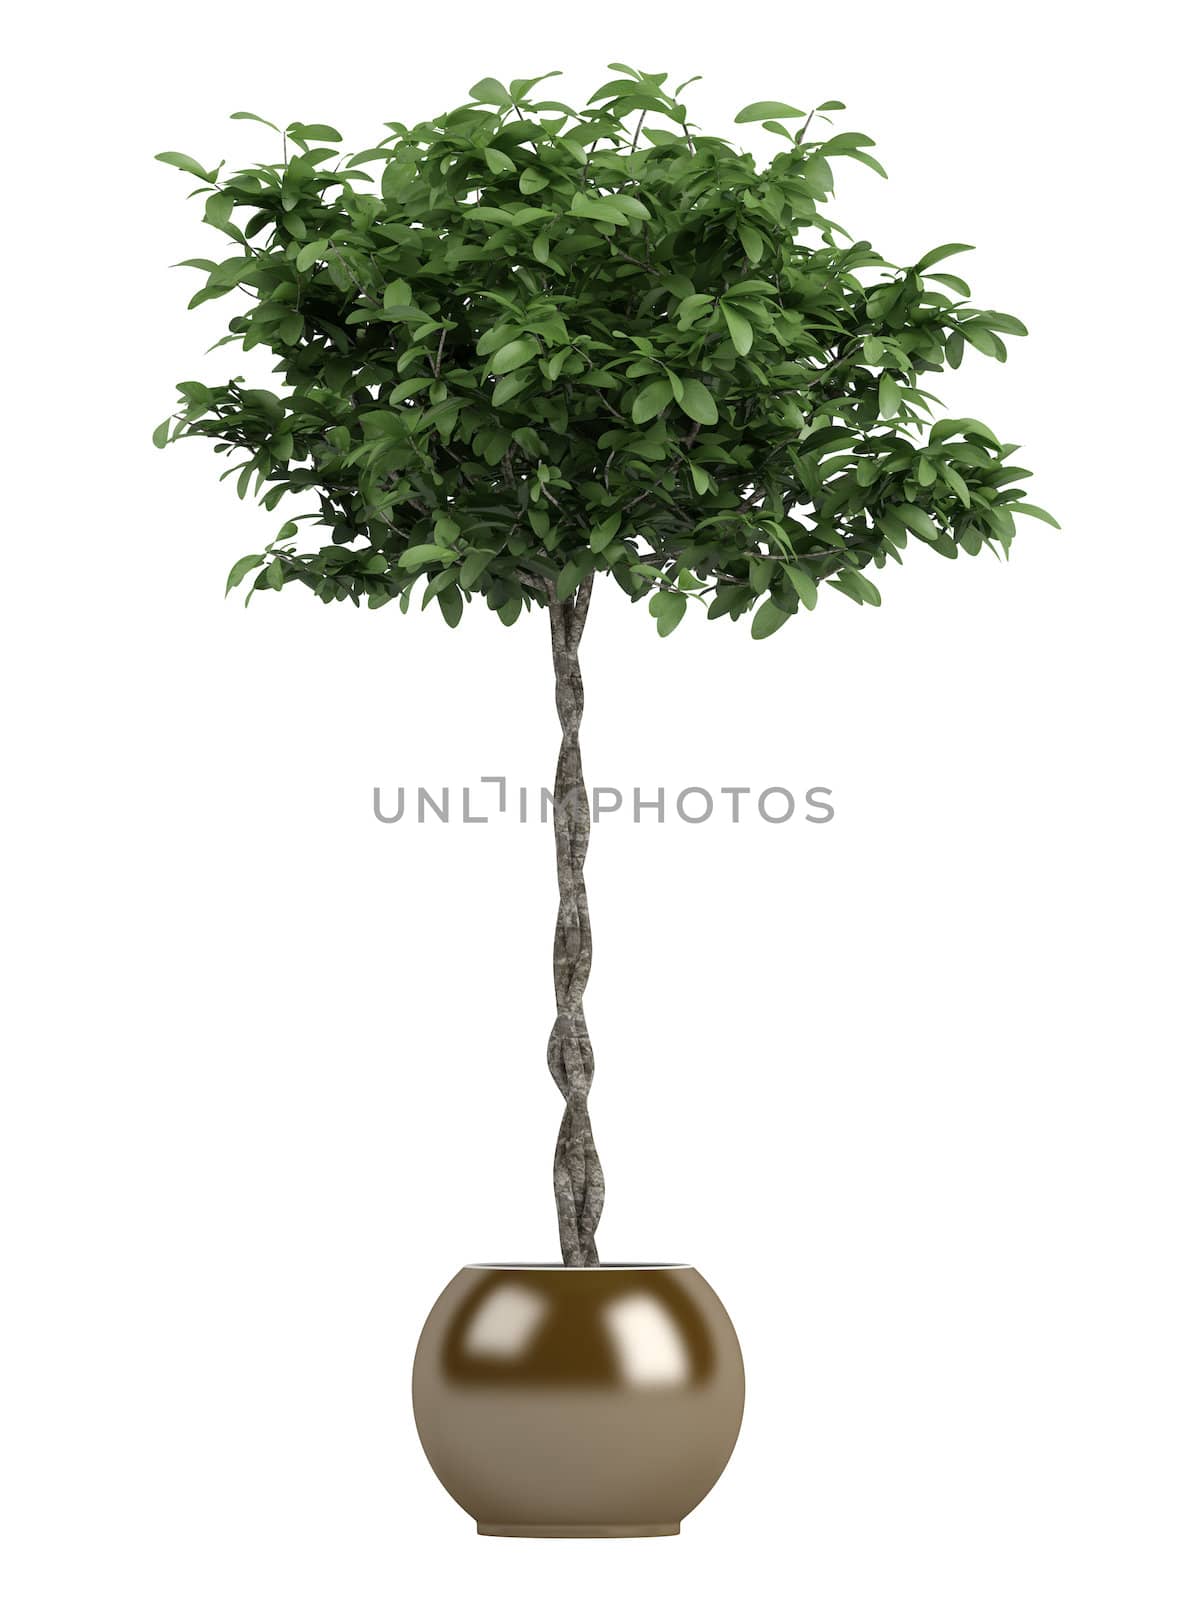 Pachira or money tree with a braided trunk growing in a container as a symbol of good fortune in the house or business isolated on white